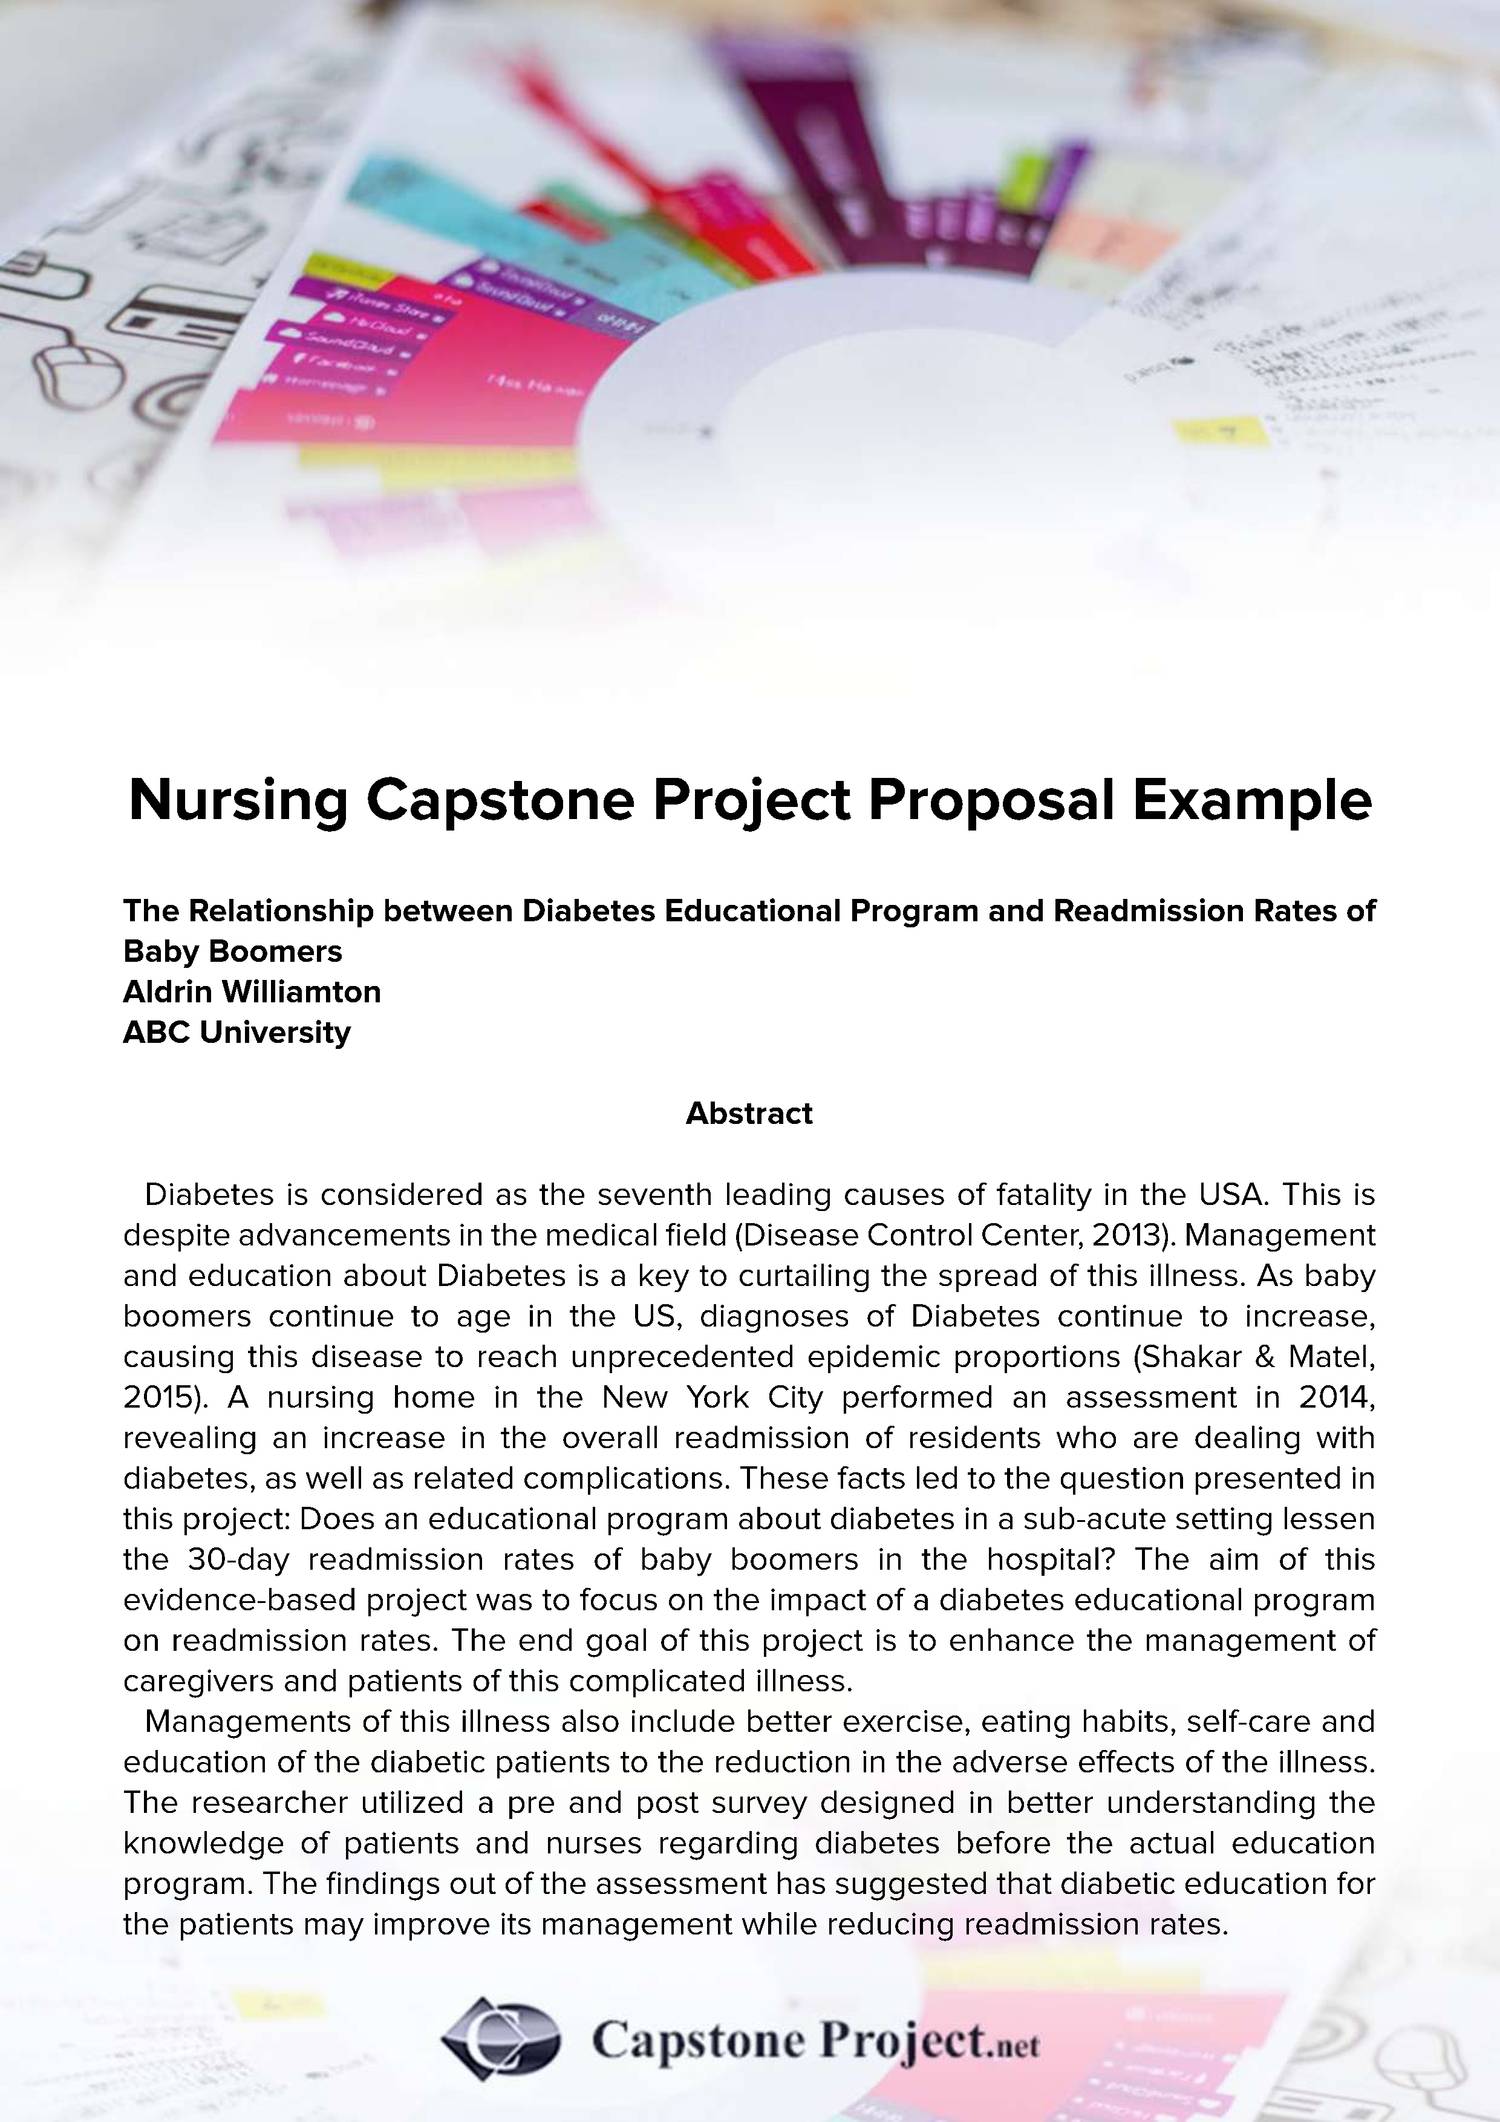 nursing thesis and capstone project